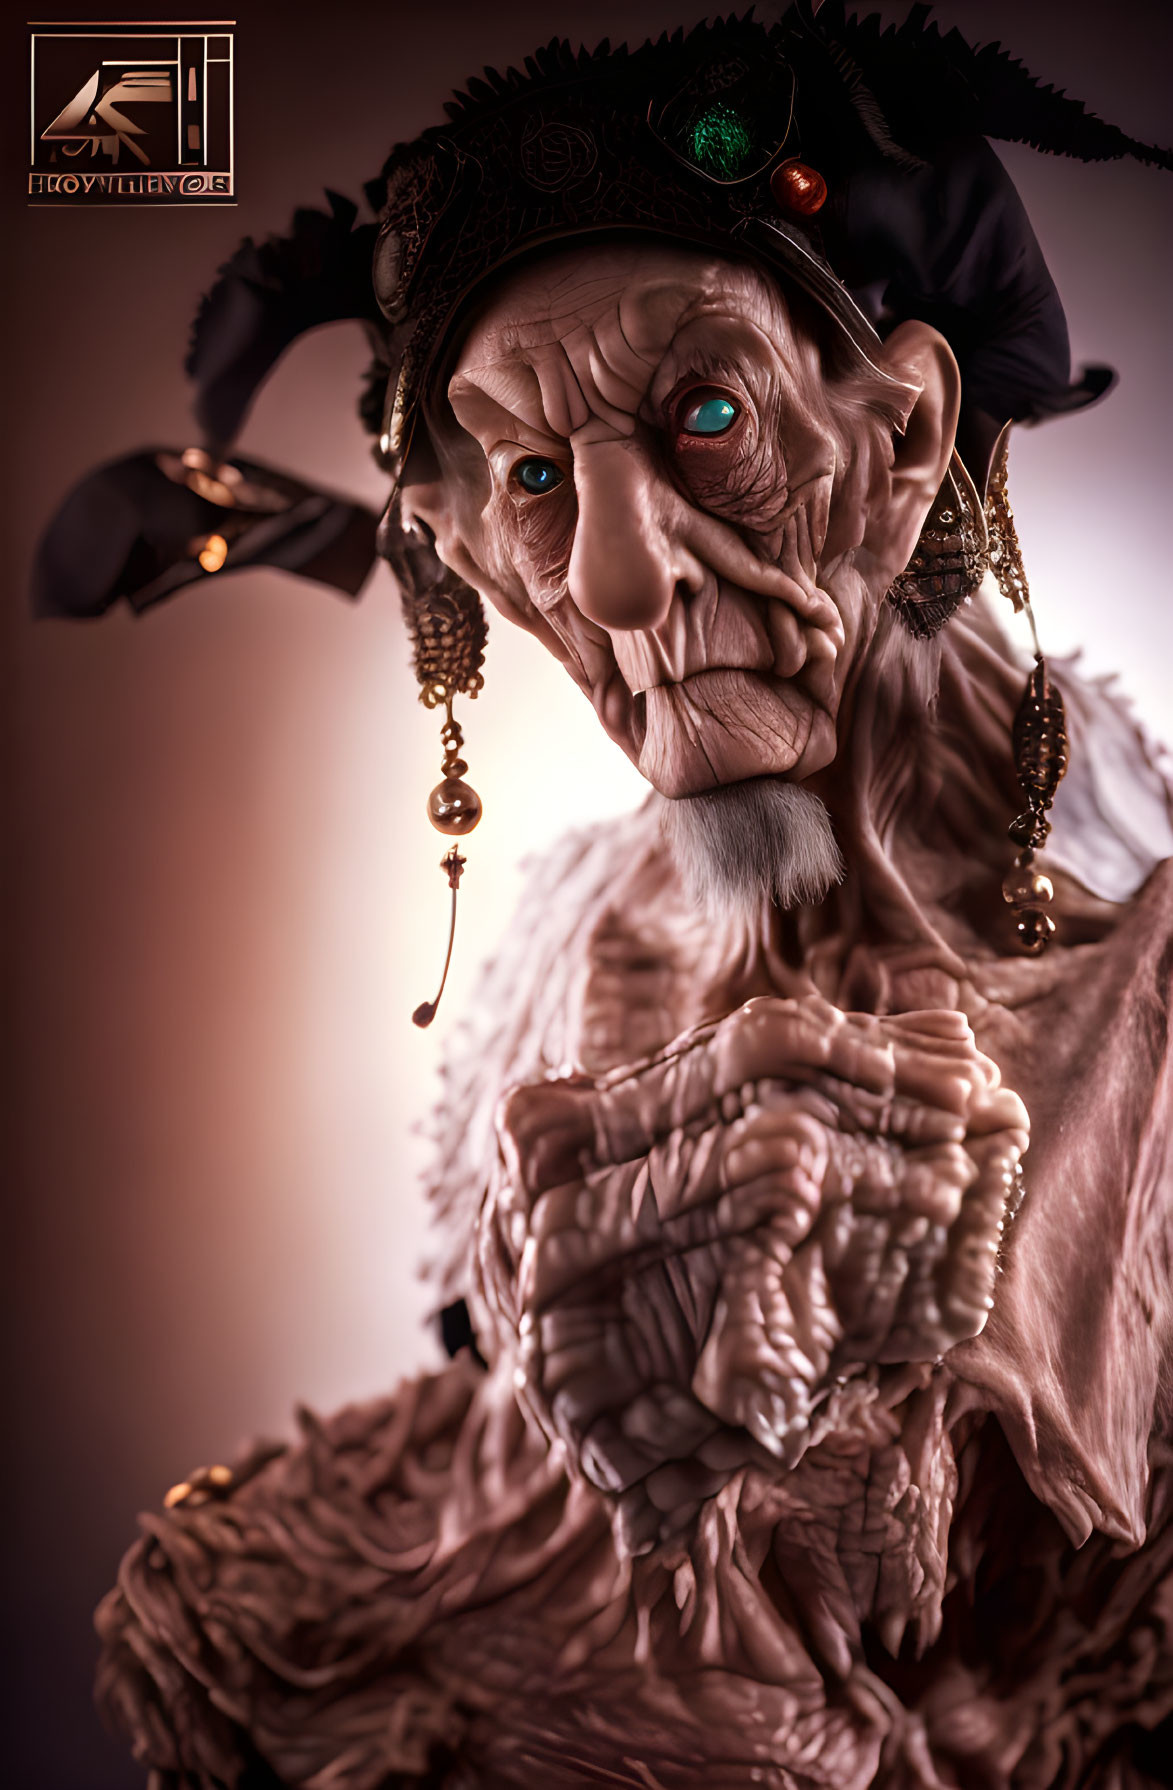 Detailed Elderly Fantasy Character Figurine with Pirate Hat and Pendant